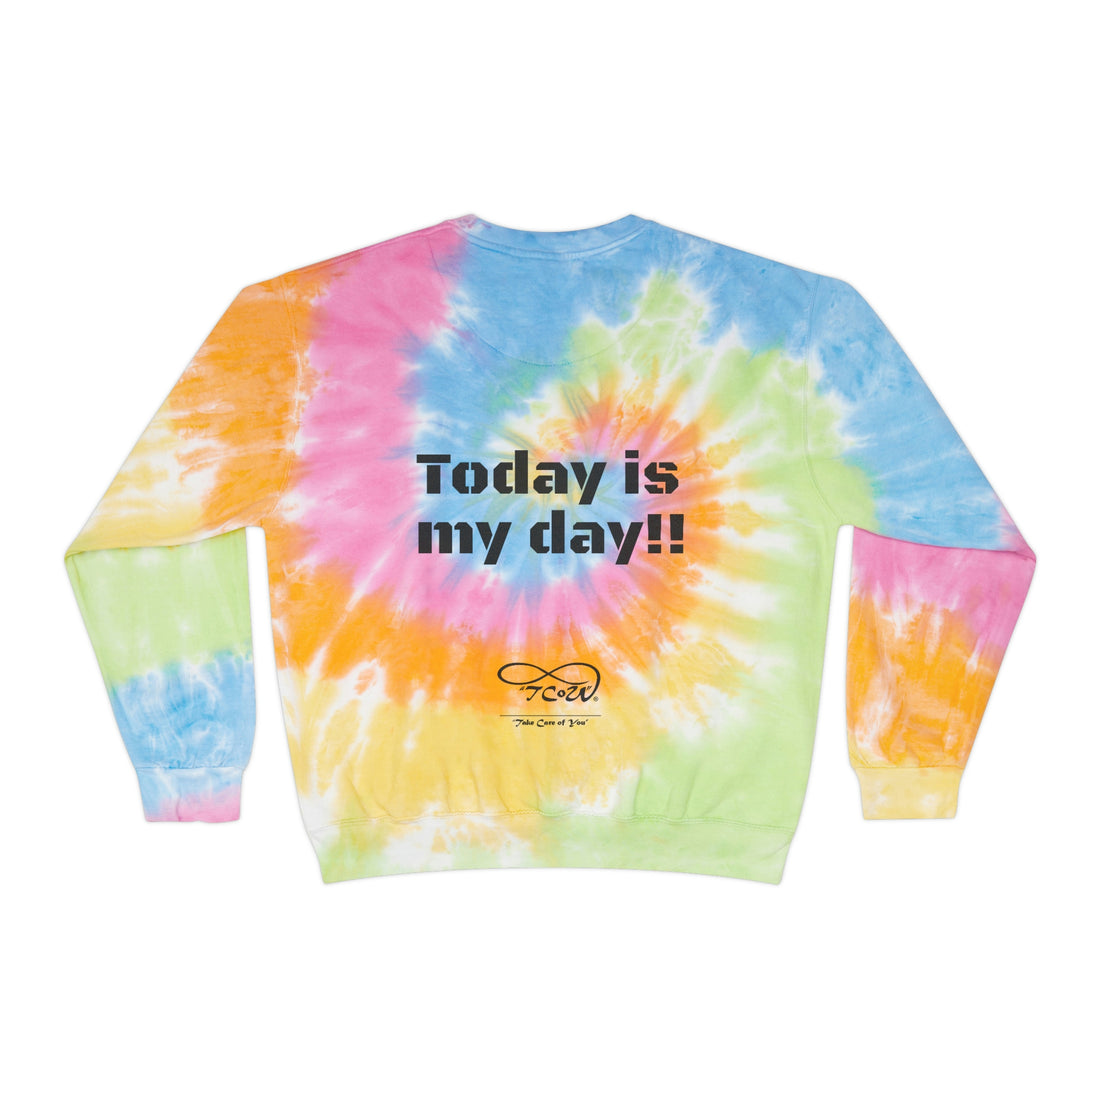 Ohhh no, Not Today!! Today is My Day!! Unisex Tie-Dye Sweatshirt, choose your color